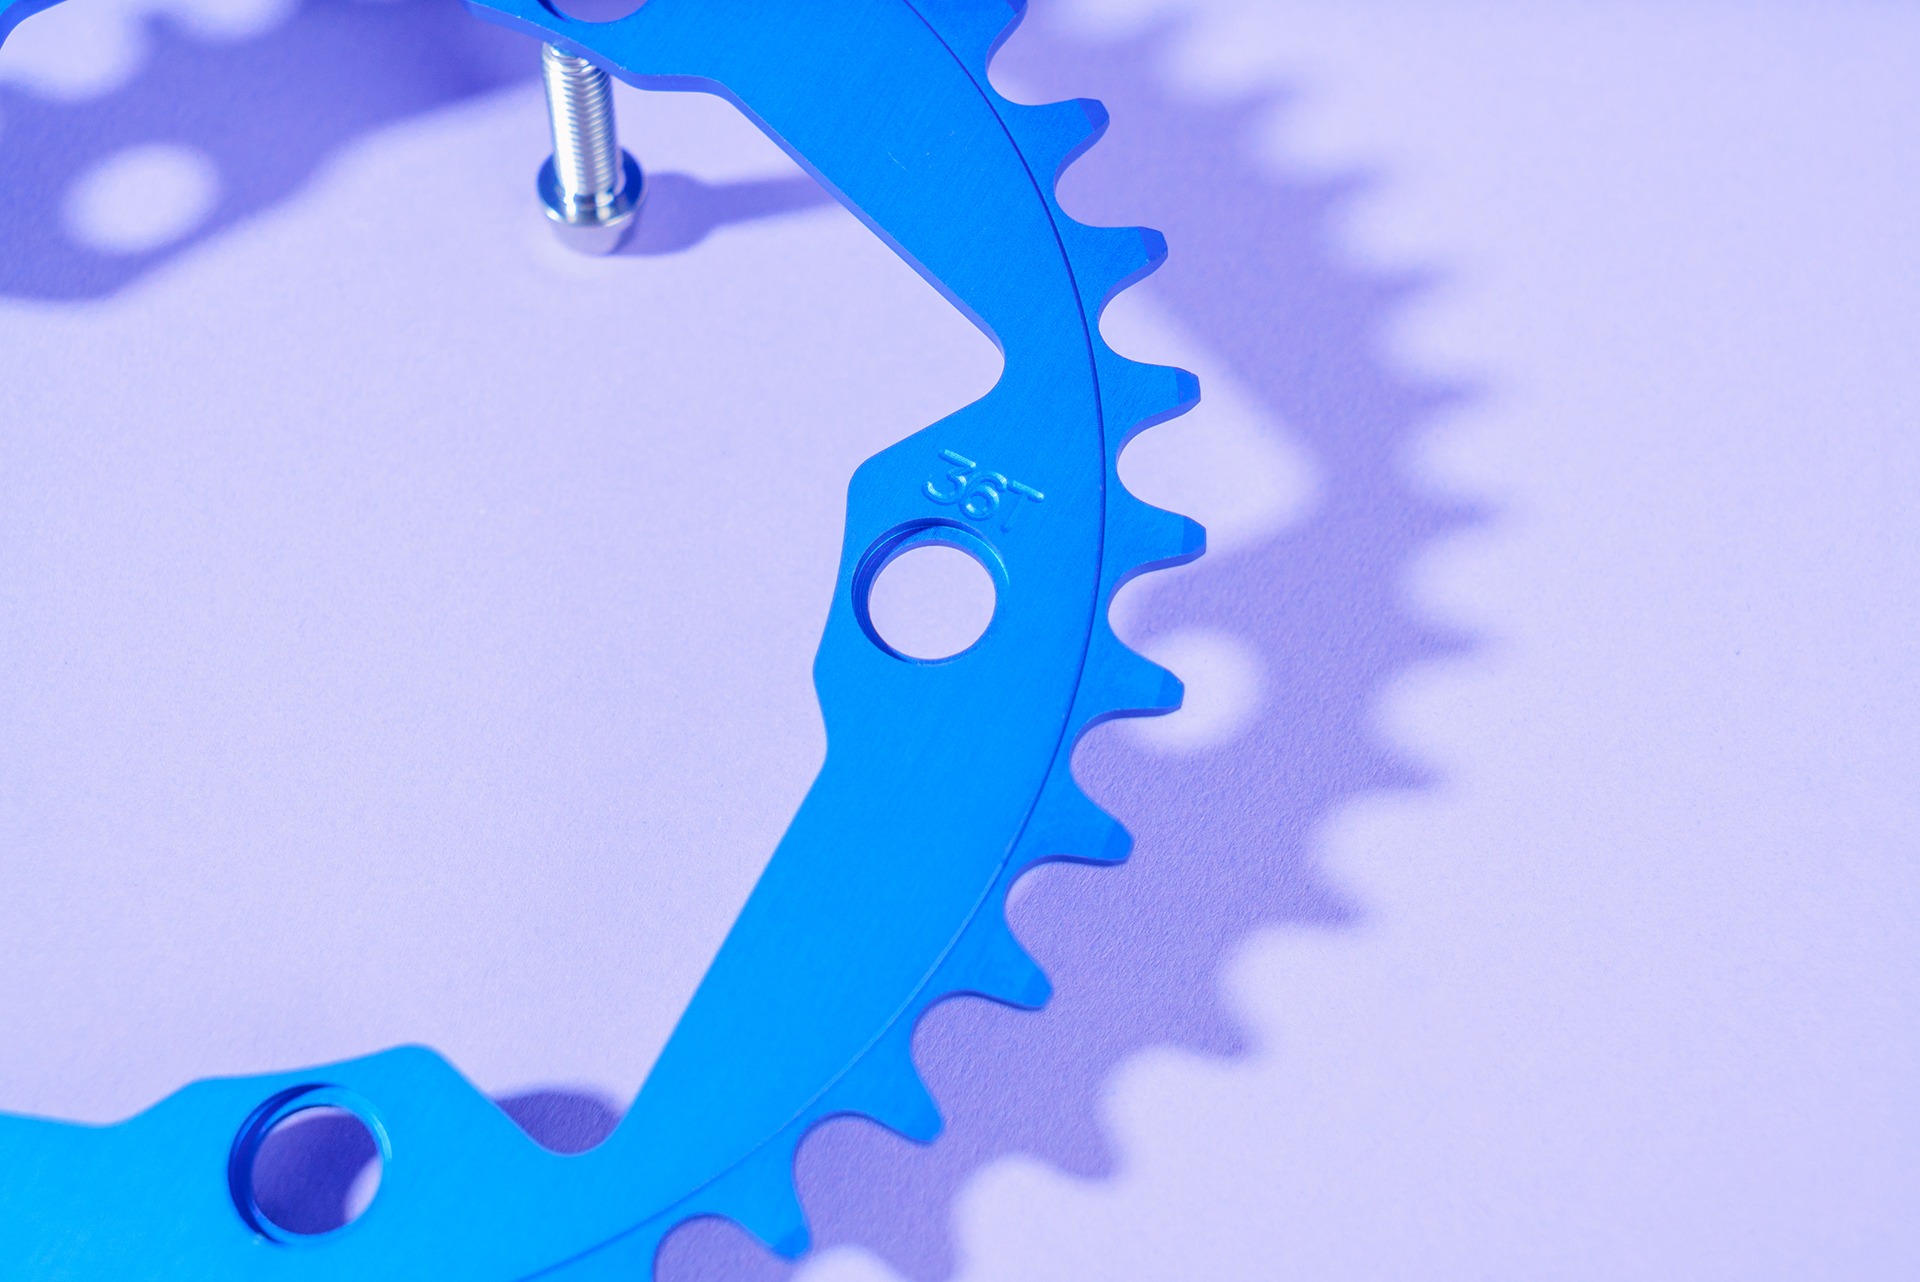 tangent chainring